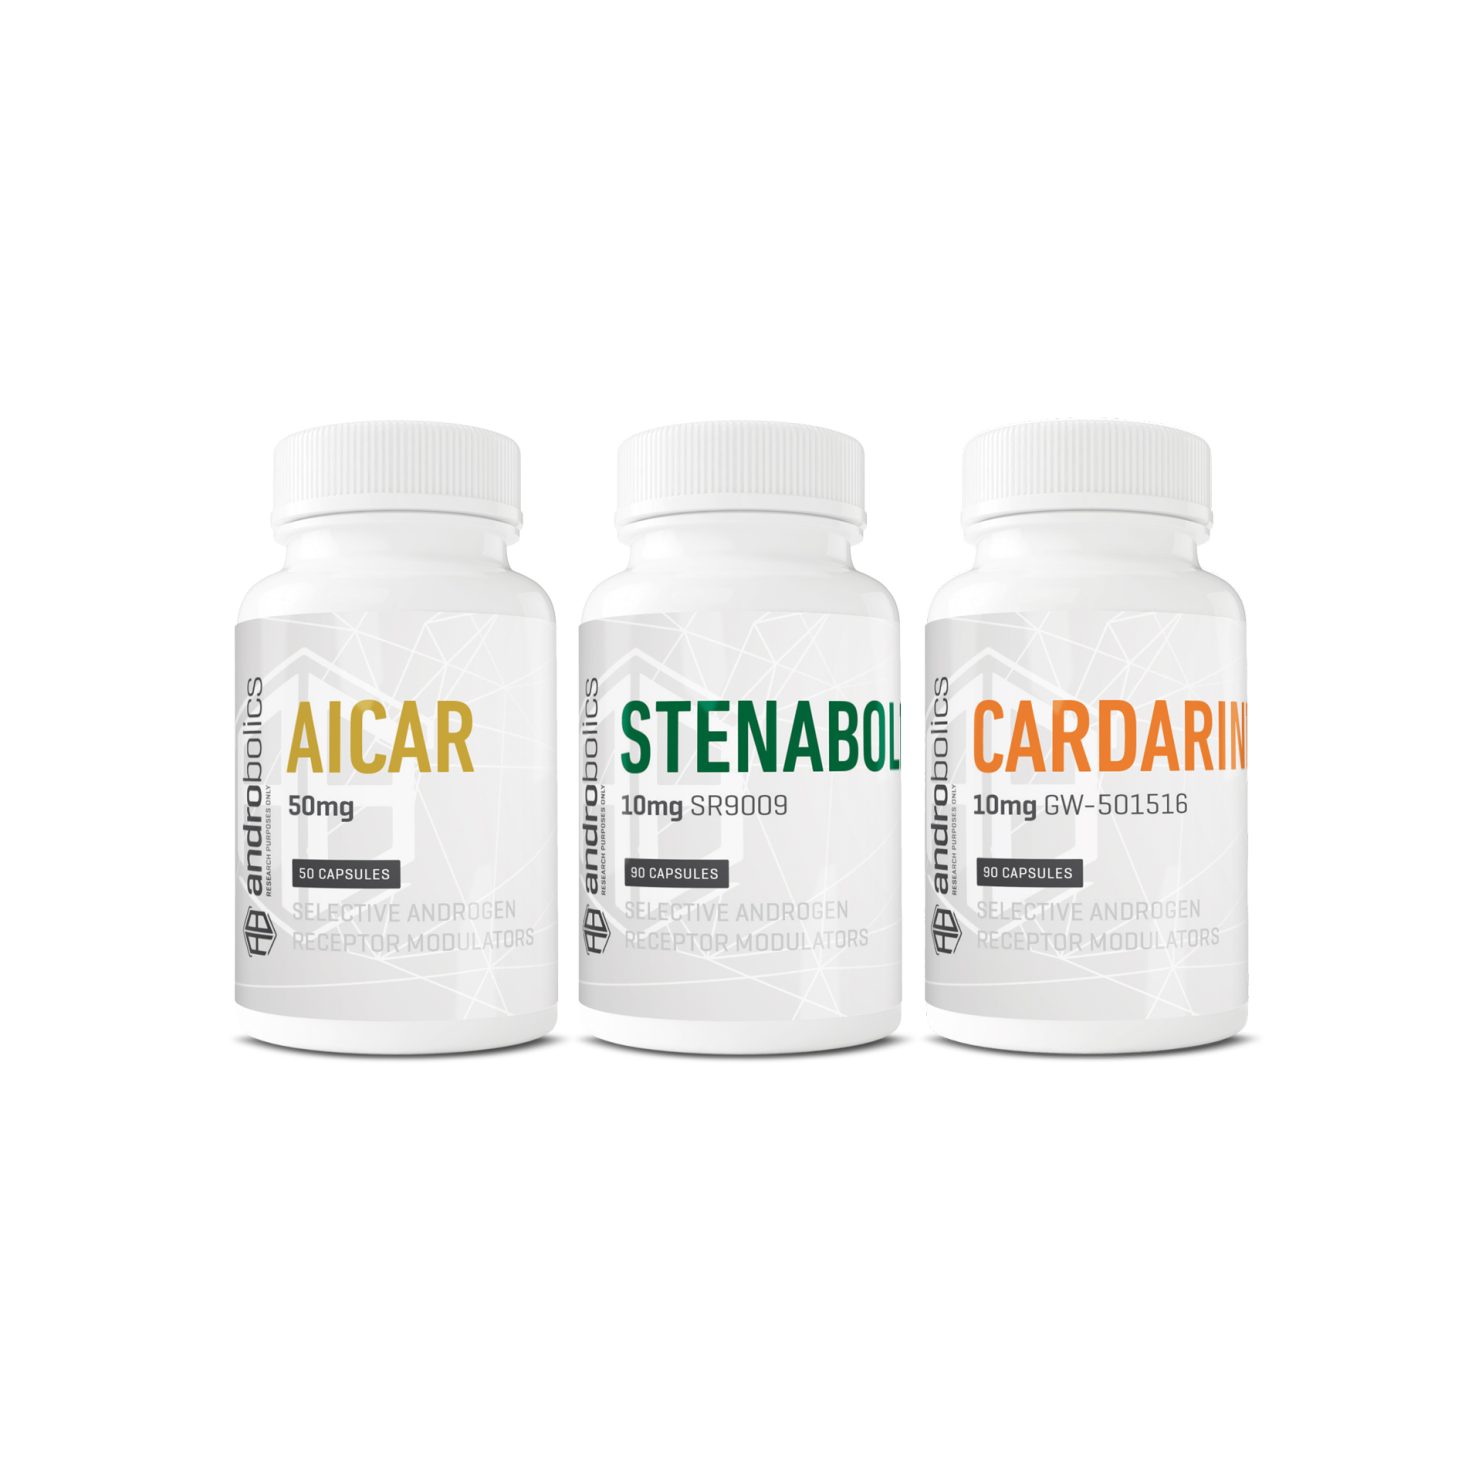 SARMS Fat Burning Stack - AICAR, Stenbolic and Cardarine for Maximum Results